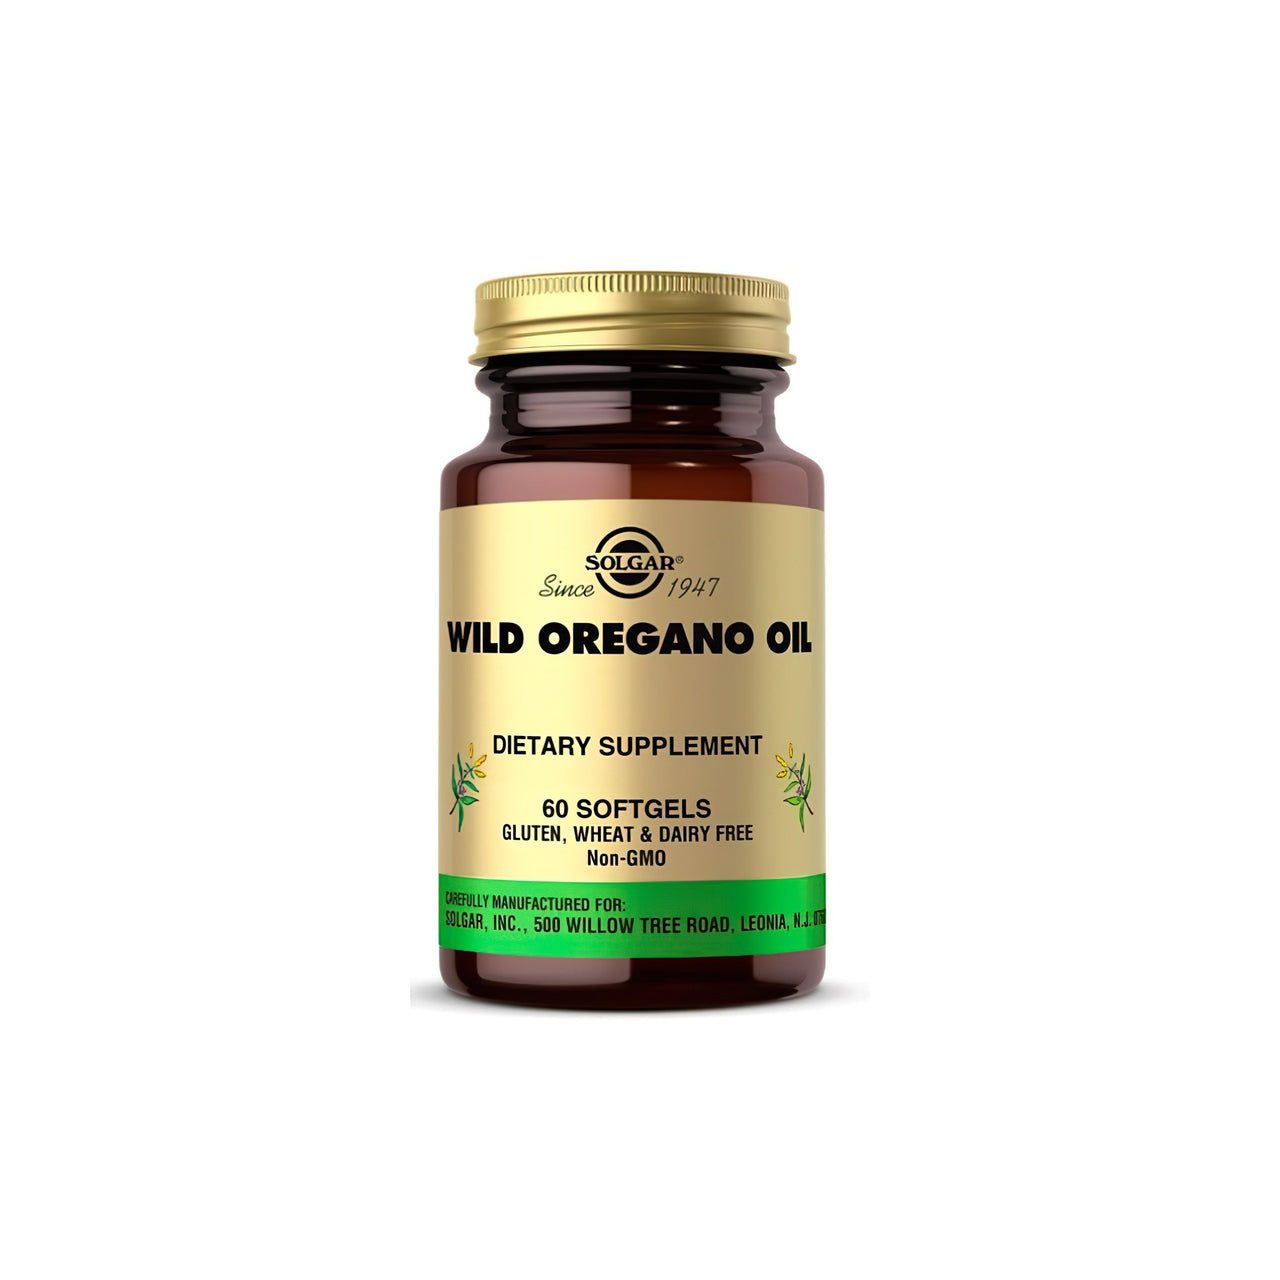 A bottle of Solgar's Wild Oregano Oil 175 mg 60 Softgels with antioxidant properties.